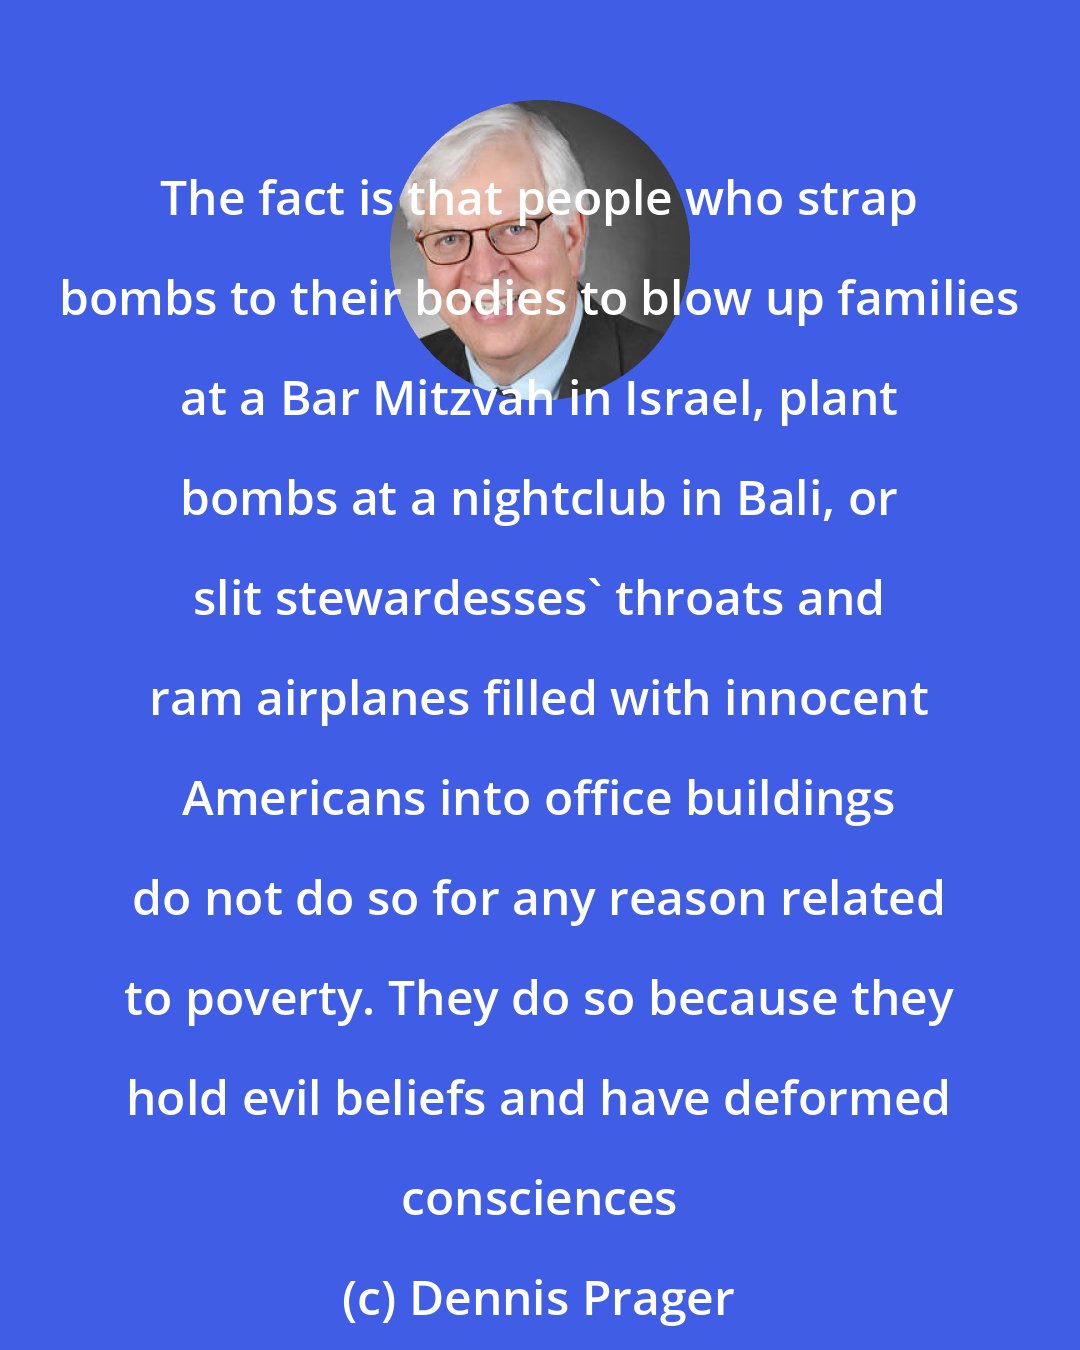 Dennis Prager: The fact is that people who strap bombs to their bodies to blow up families at a Bar Mitzvah in Israel, plant bombs at a nightclub in Bali, or slit stewardesses' throats and ram airplanes filled with innocent Americans into office buildings do not do so for any reason related to poverty. They do so because they hold evil beliefs and have deformed consciences